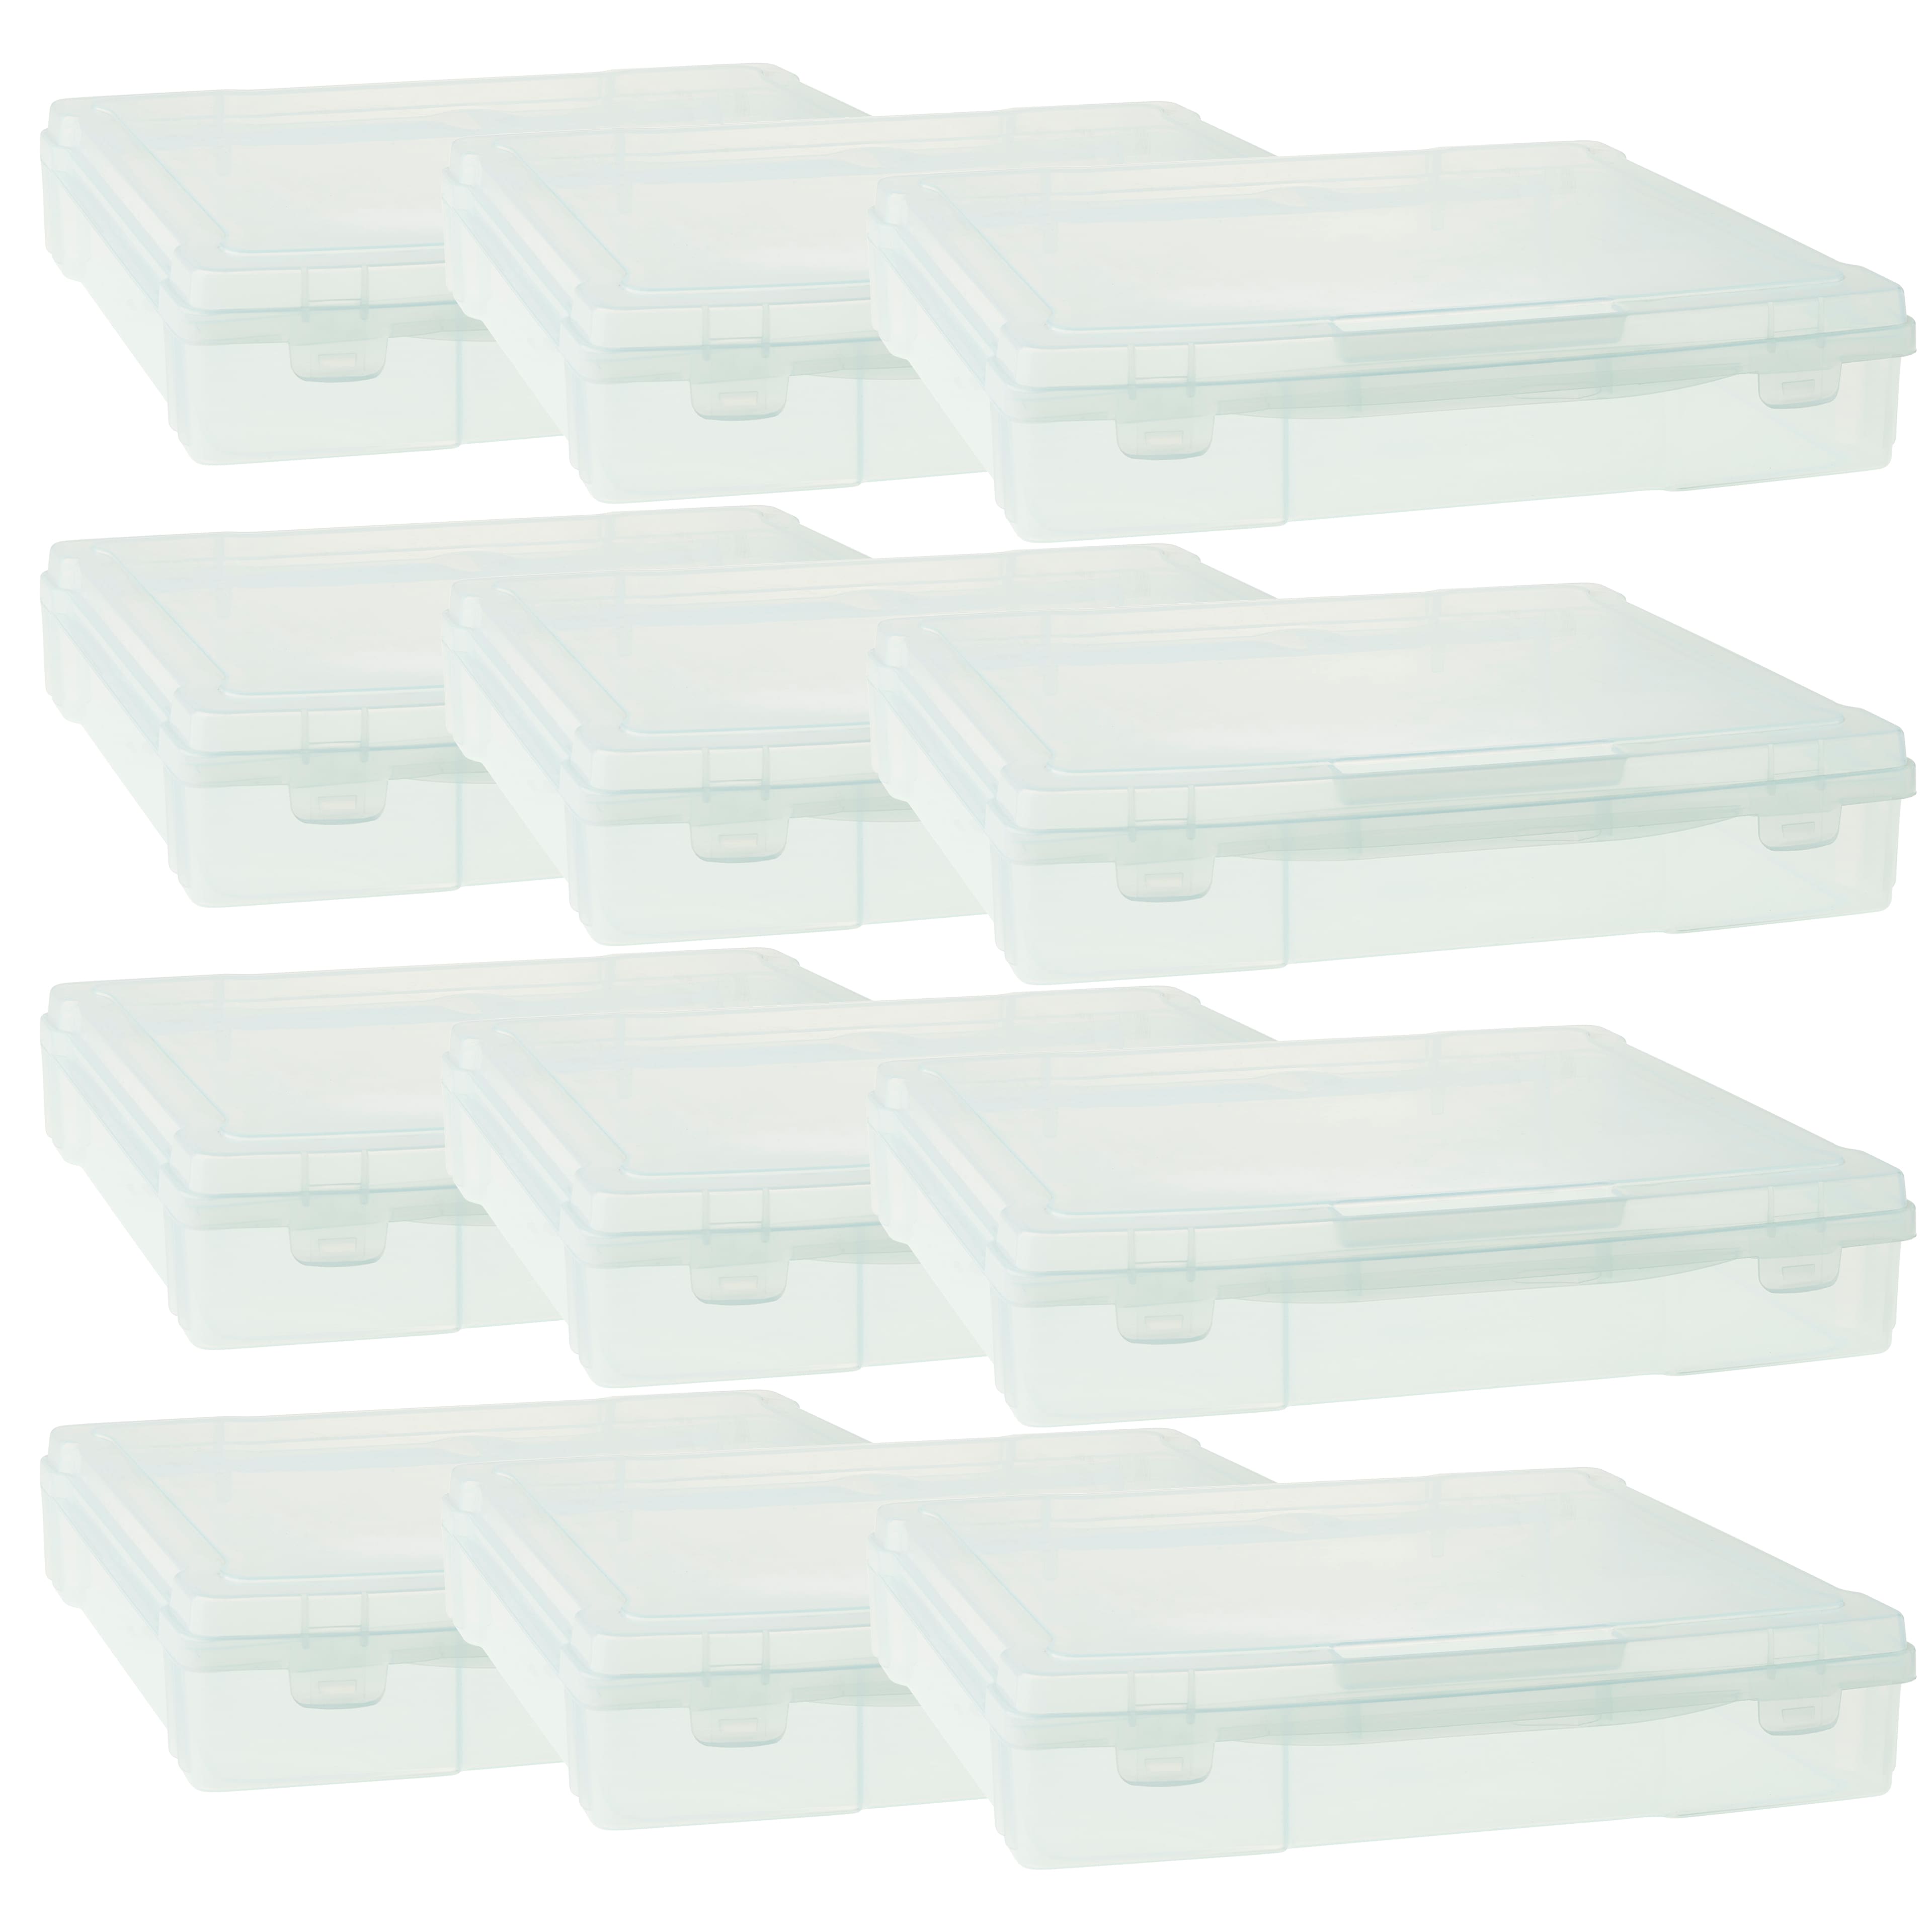 12” x 12” Plastic Scrapbook Storage Case by Simply Tidy- Portable Case for  Documents, Papers, Sewing, Crafts - Bulk 12 Pack